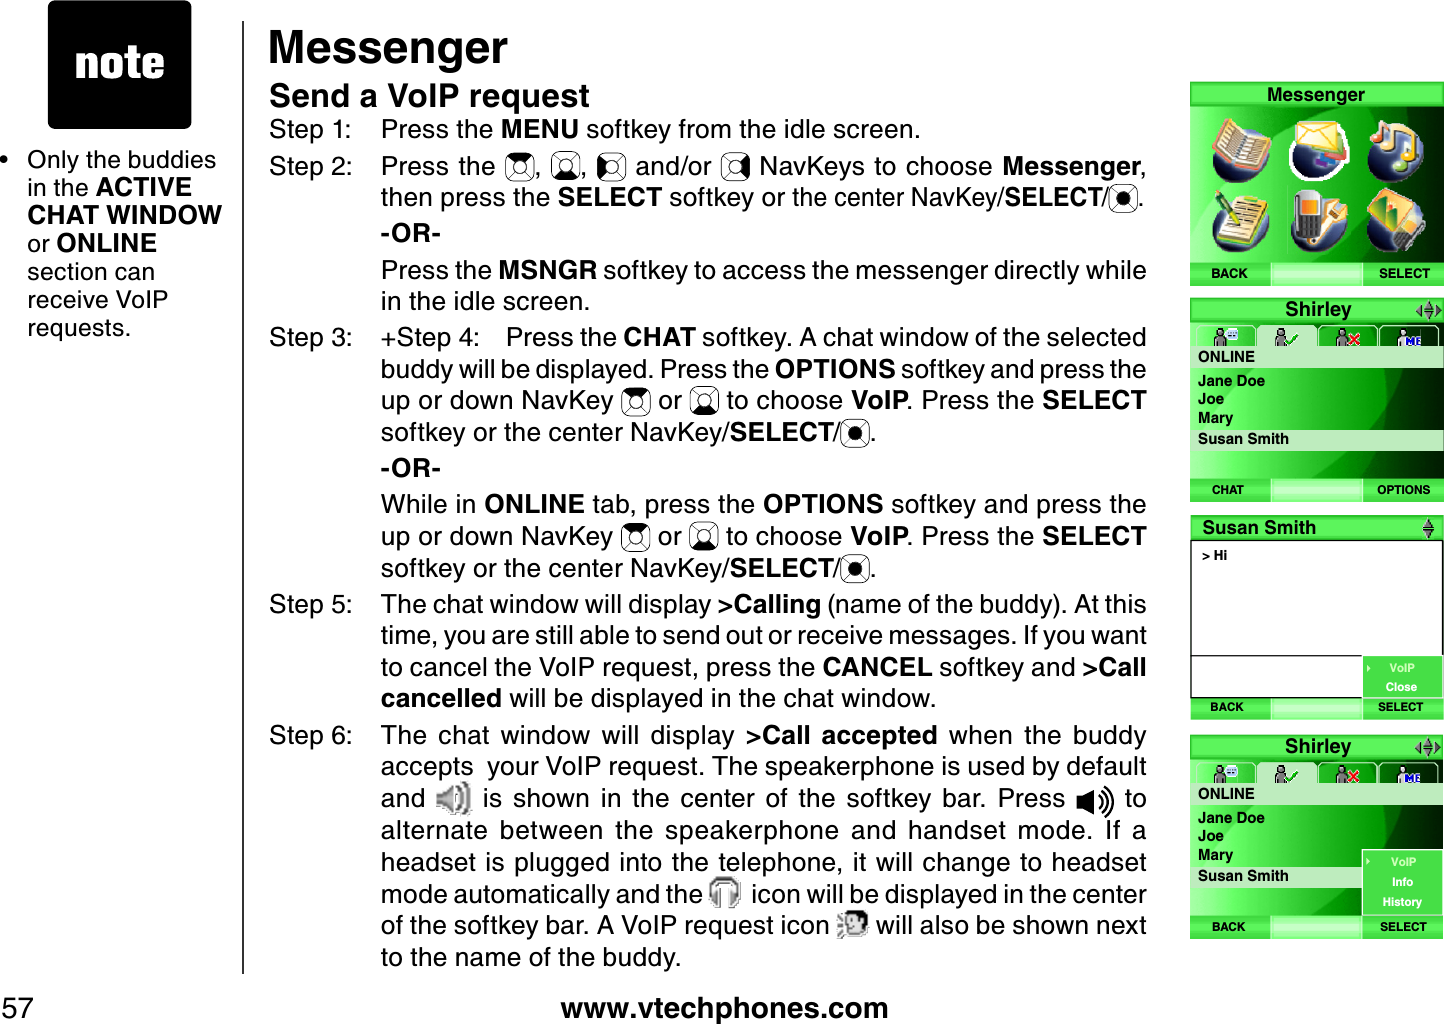 www.vtechphones.com57MessengerSend a VoIP requestStep 1: Press the MENU softkey from the idle screen.Step 2: Press the  , ,  and/or   NavKeys to choose Messenger,then press the SELECT softkey or the center NavKey/SELECT/ .    -OR-    Press the MSNGR softkey to access the messenger directly while in the idle screen.Step 3: + Step 4: Press the CHAT softkey. A chat window of the selected buddy will be displayed. Press the OPTIONS softkey and press the up or down NavKey   or   to choose VoIP. Press the SELECTsoftkey or the center NavKey/SELECT/.    -OR-    While in ONLINE tab, press the OPTIONS softkey and press the up or down NavKey   or   to choose VoIP. Press the SELECT softkey or the center NavKey/SELECT/.Step 5: The chat window will display &gt; Calling (name of the buddy). At this time, you are still able to send out or receive messages. If you want to cancel the VoIP request, press the CANCEL softkey and &gt; Call cancelled will be displayed in the chat window.Step 6: The  chat  window  will  display  &gt; Call  accepted  when  the  buddy accepts  your VoIP request. The speakerphone is used by default and    is  shown  in  the  center  of  the  softkey  bar.  Press    to alternate  between  the  speakerphone  and  handset  mode.  If  a headset is plugged into the telephone, it will change to headset mode automatically and the    icon will be displayed in the center of the softkey bar. A VoIP request icon   will also be shown next to the name of the buddy. Only the buddies in the ACTIVE CHAT WINDOWor ONLINEsection can receive VoIP requests.•SELECTMessengerBACKShirleyONLINEOPTIONSCHATJane DoeJoeMarySusan Smith&gt; HiSusan SmithBACK SELECTVoIPCloseShirleyONLINESELECTBACKJane DoeJoeMarySusan SmithVoIPInfoHistory